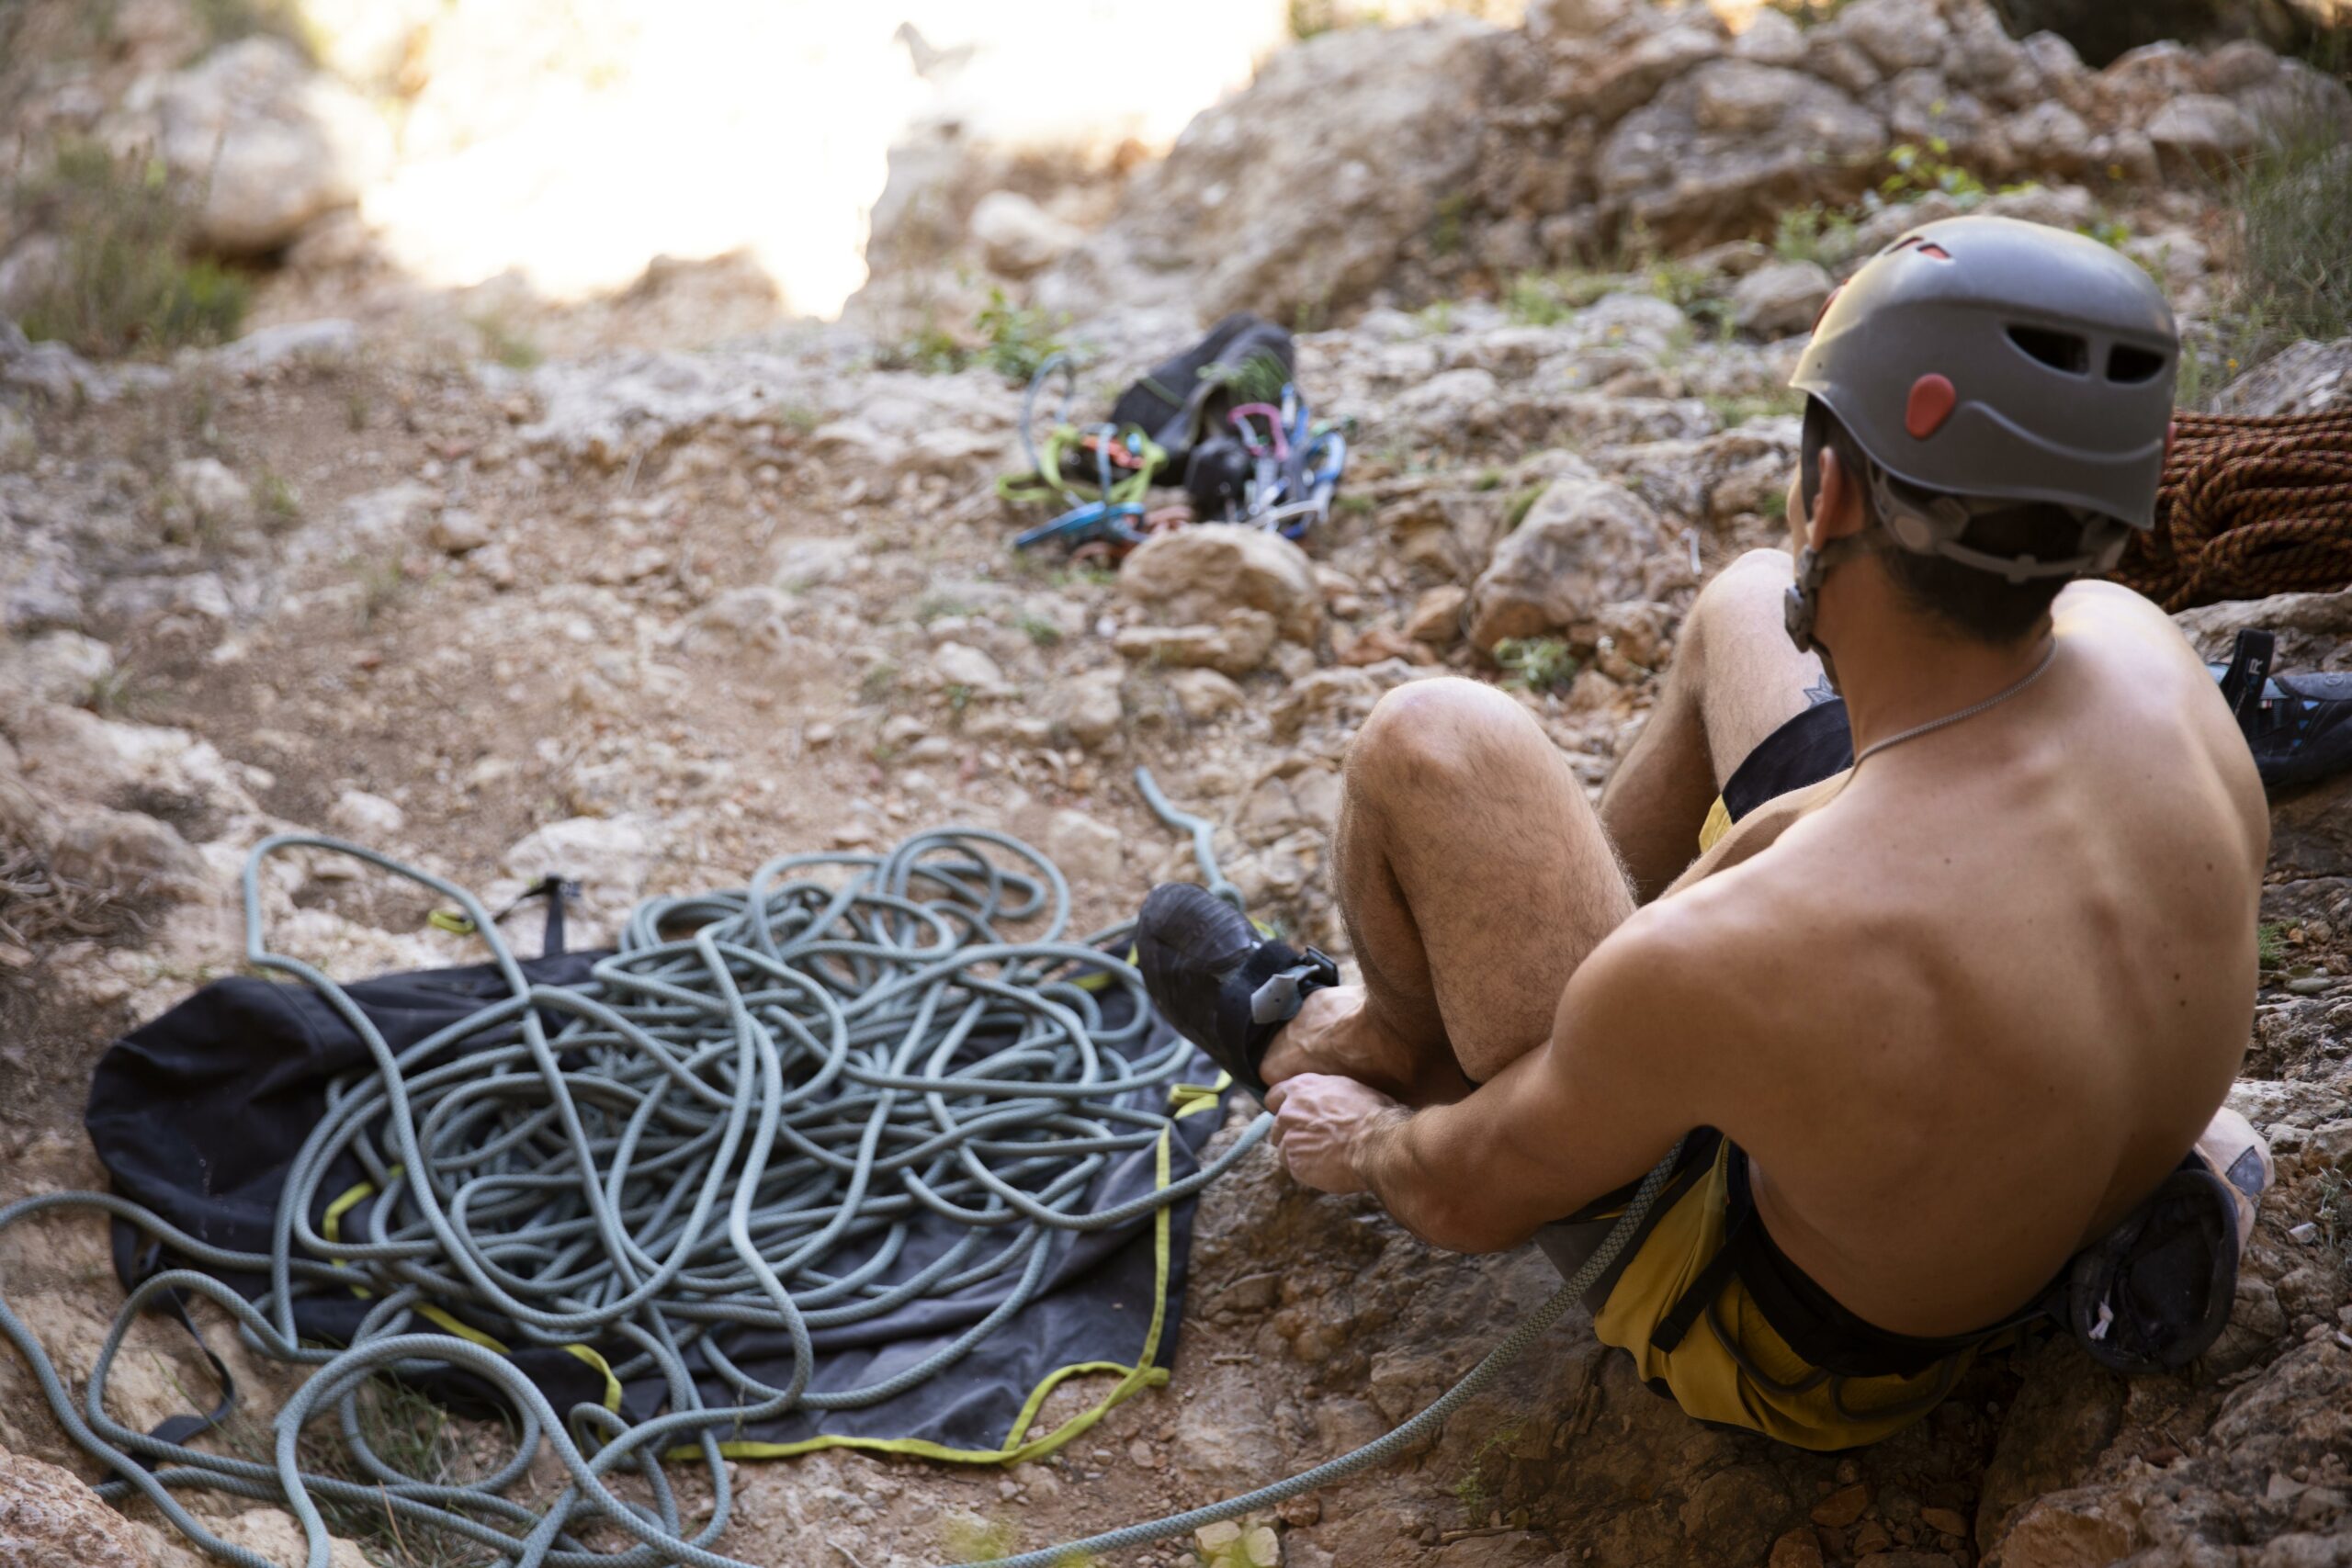 An overhead view of a person wearing a helmet and harness and carrying a coiled rope over their shoulder while hiking to a rappelling location.